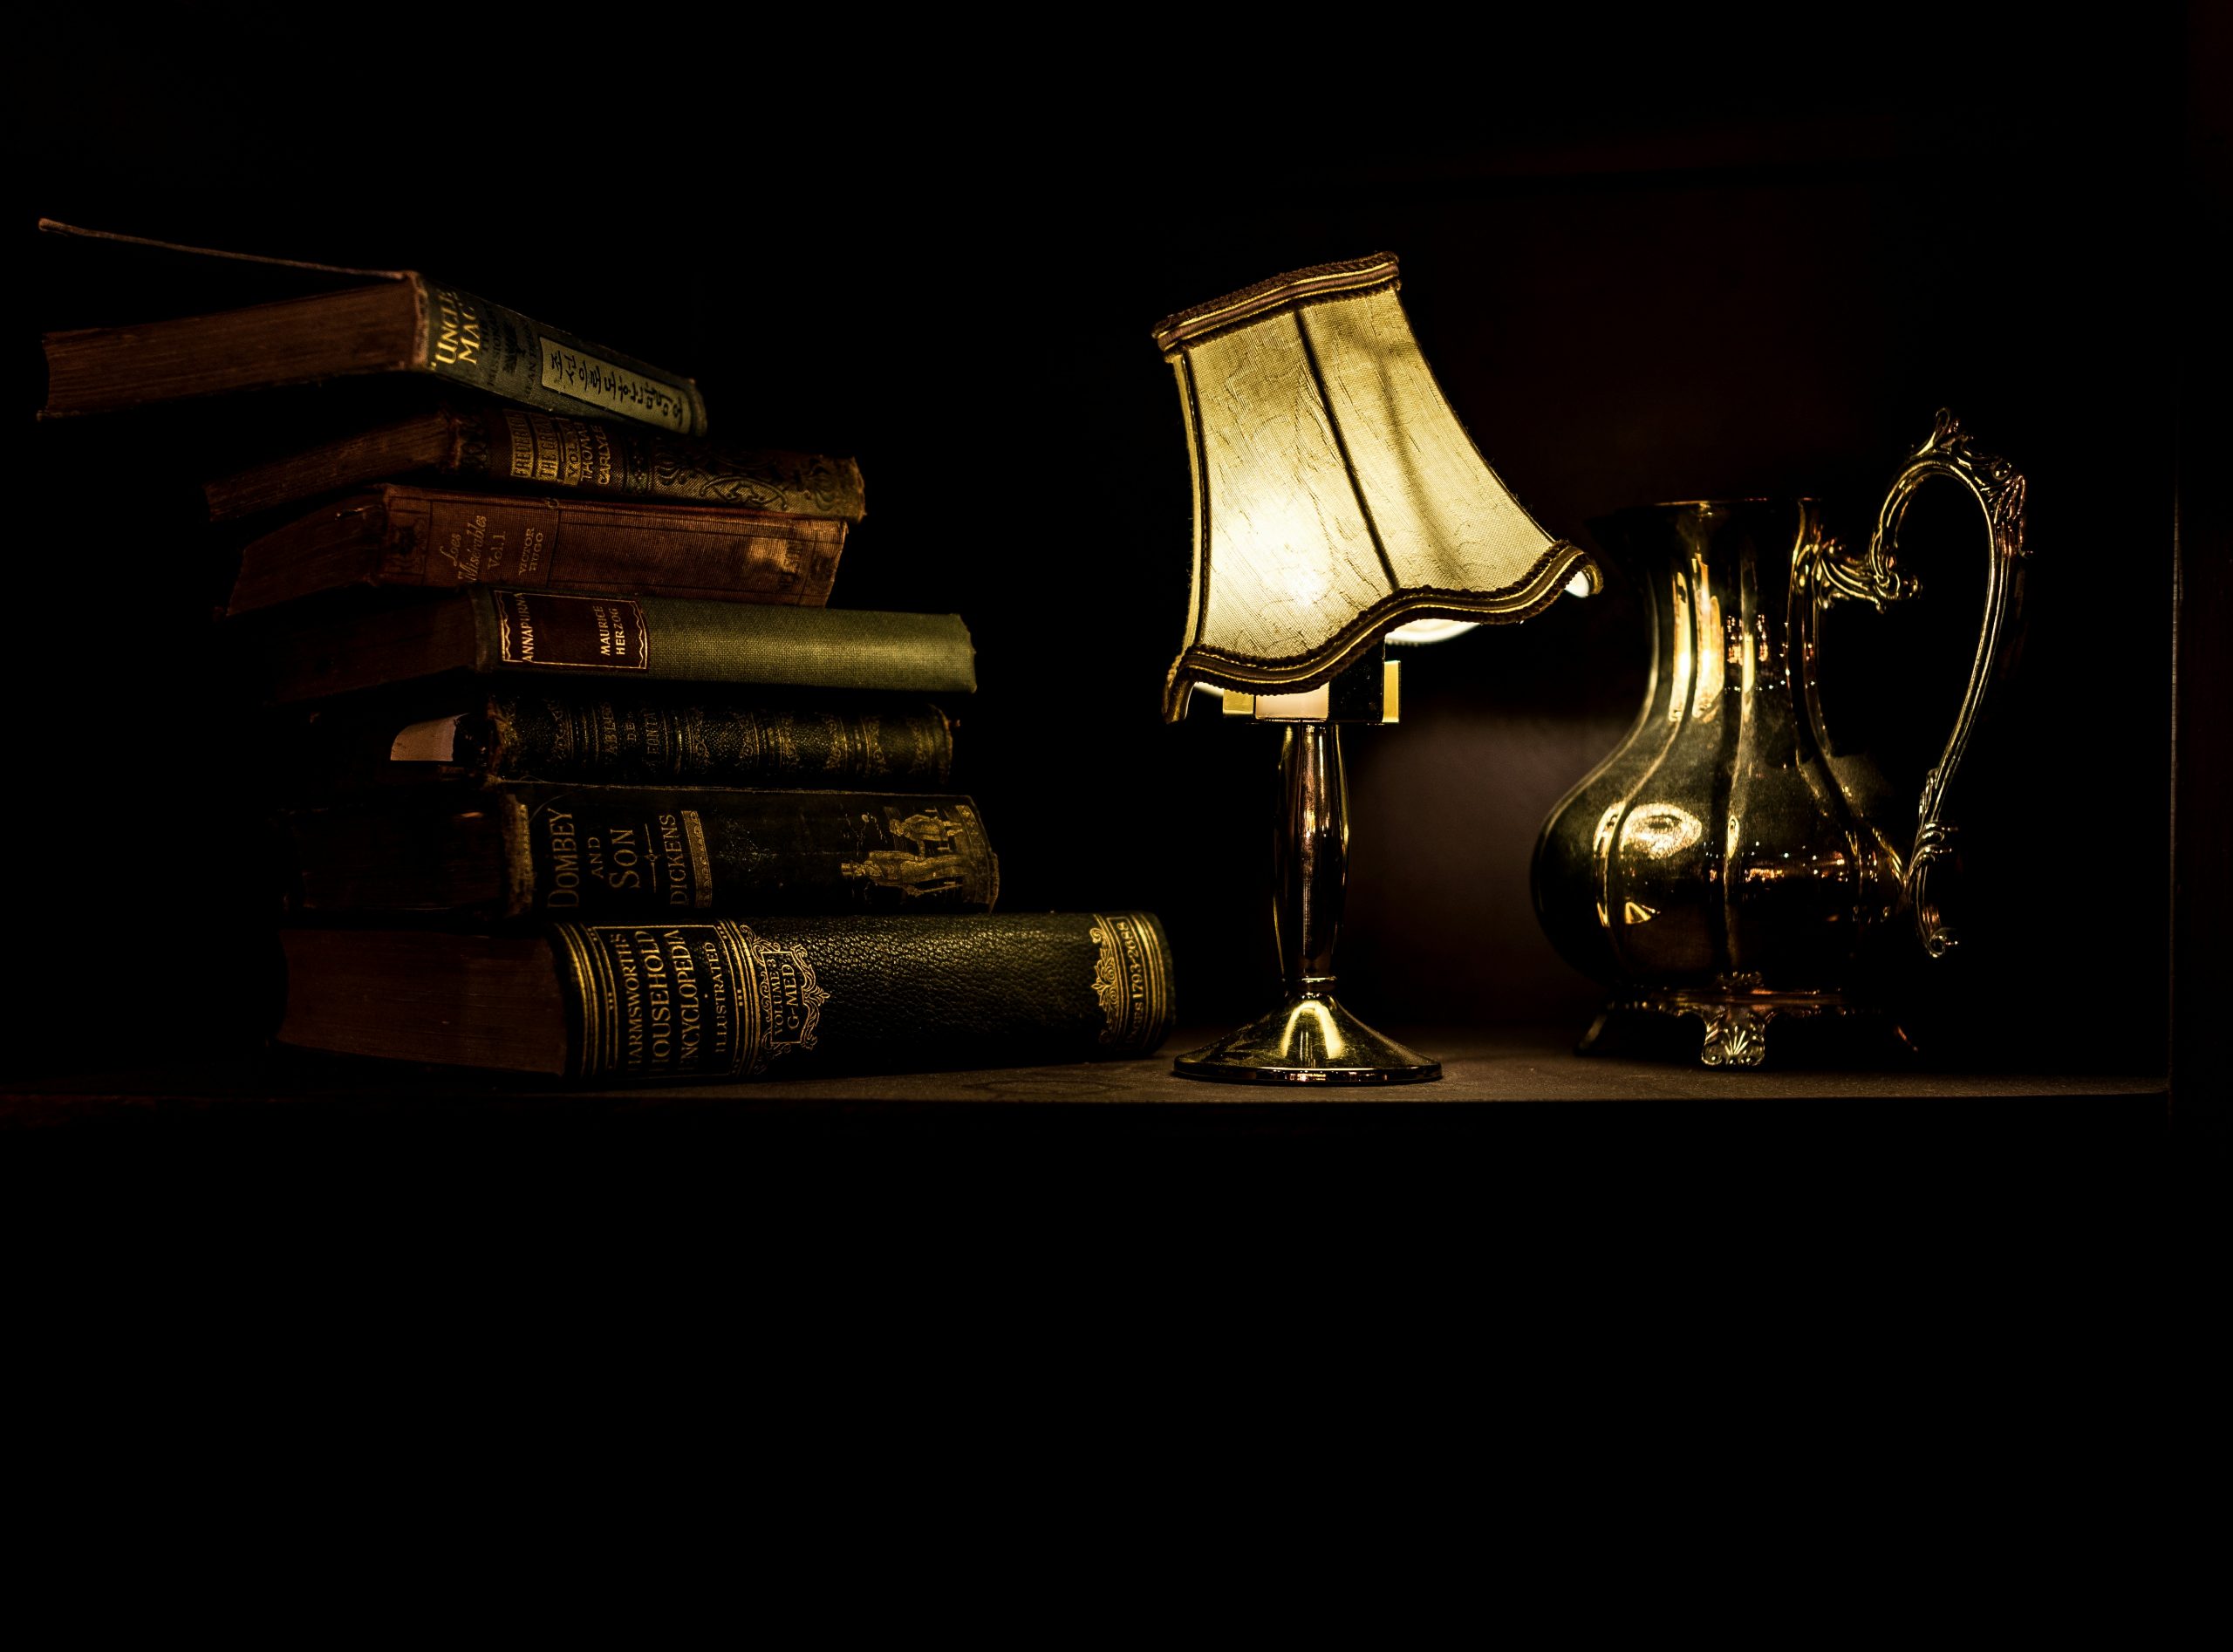 Books and lamp on a table